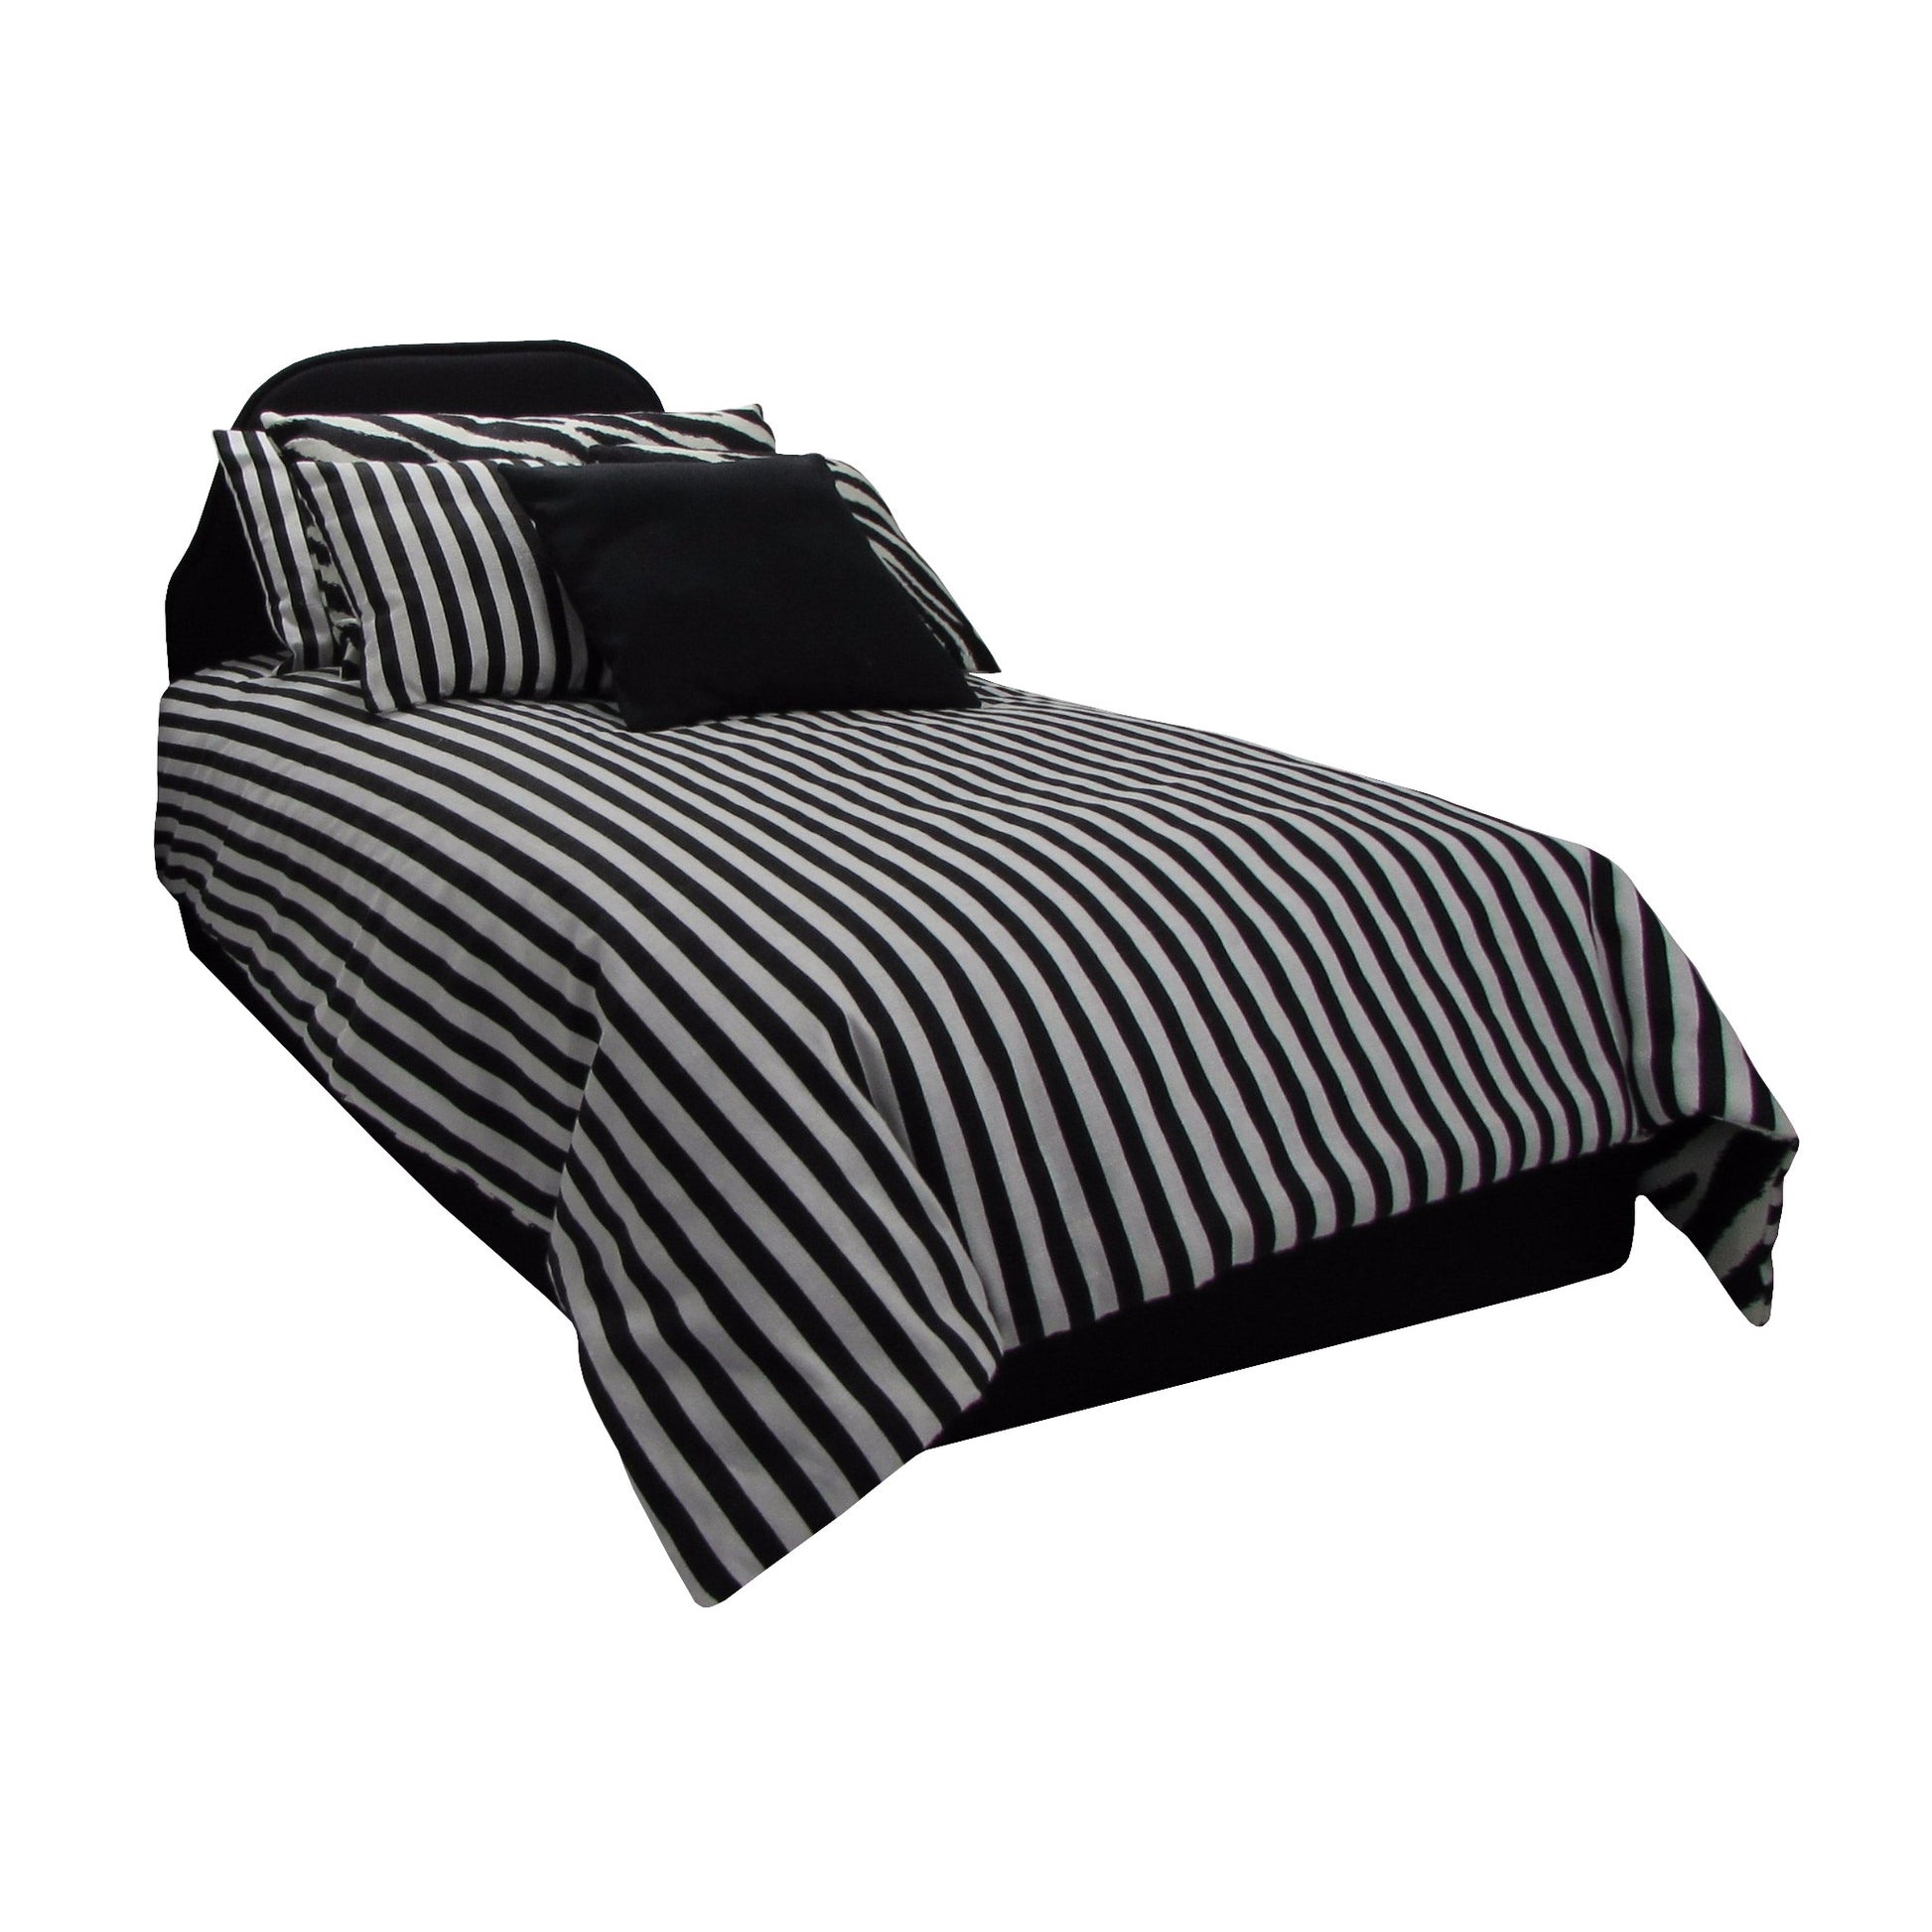 Zebra Doll Pillows, Striped Doll Comforter, and Black Upholstered Doll Bed for 18-inch dolls